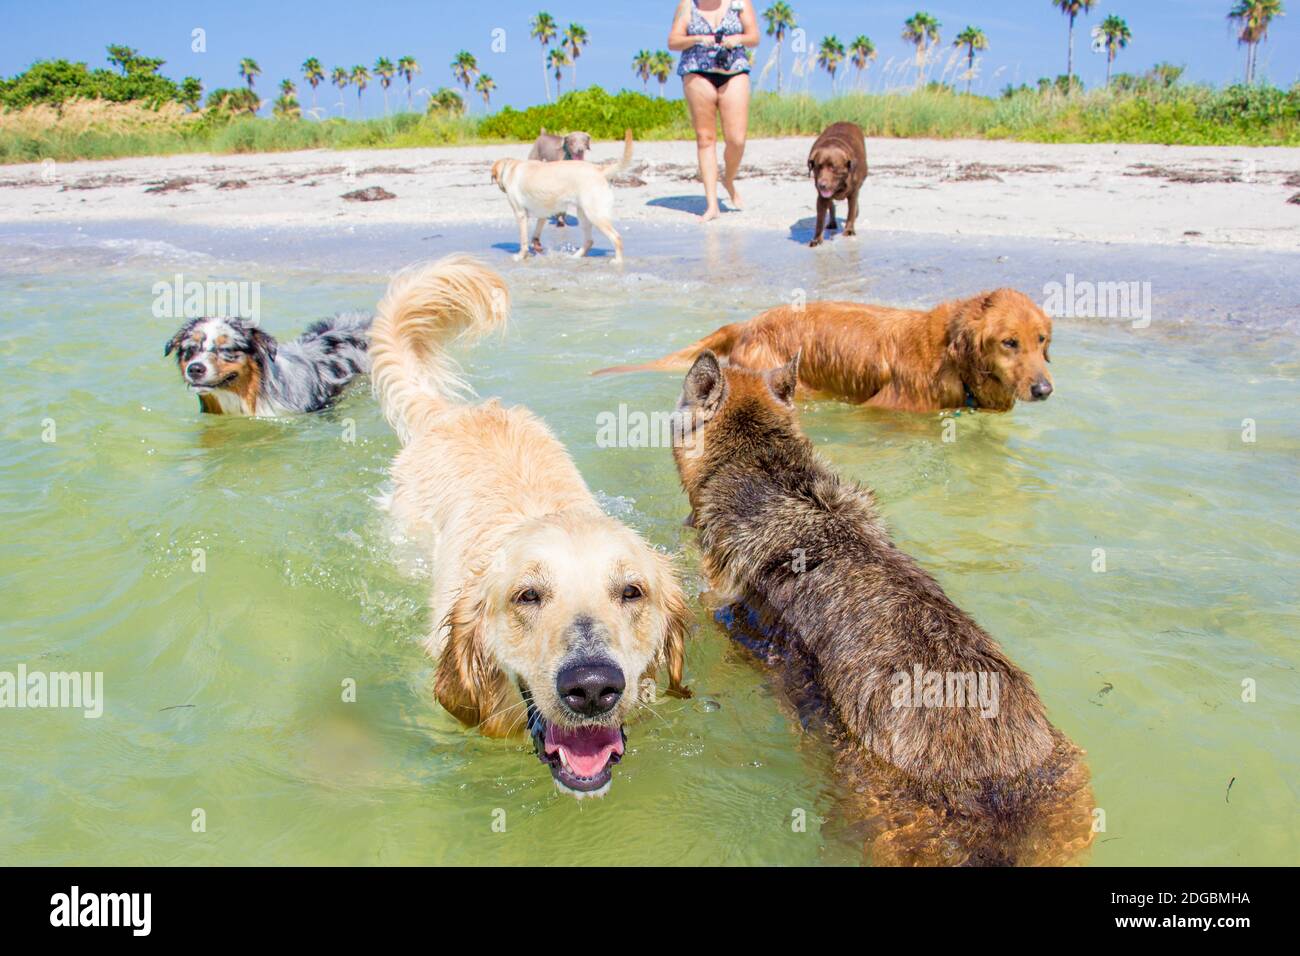 Woman playing on beach with seven dogs, Florida, USA Stock Photo